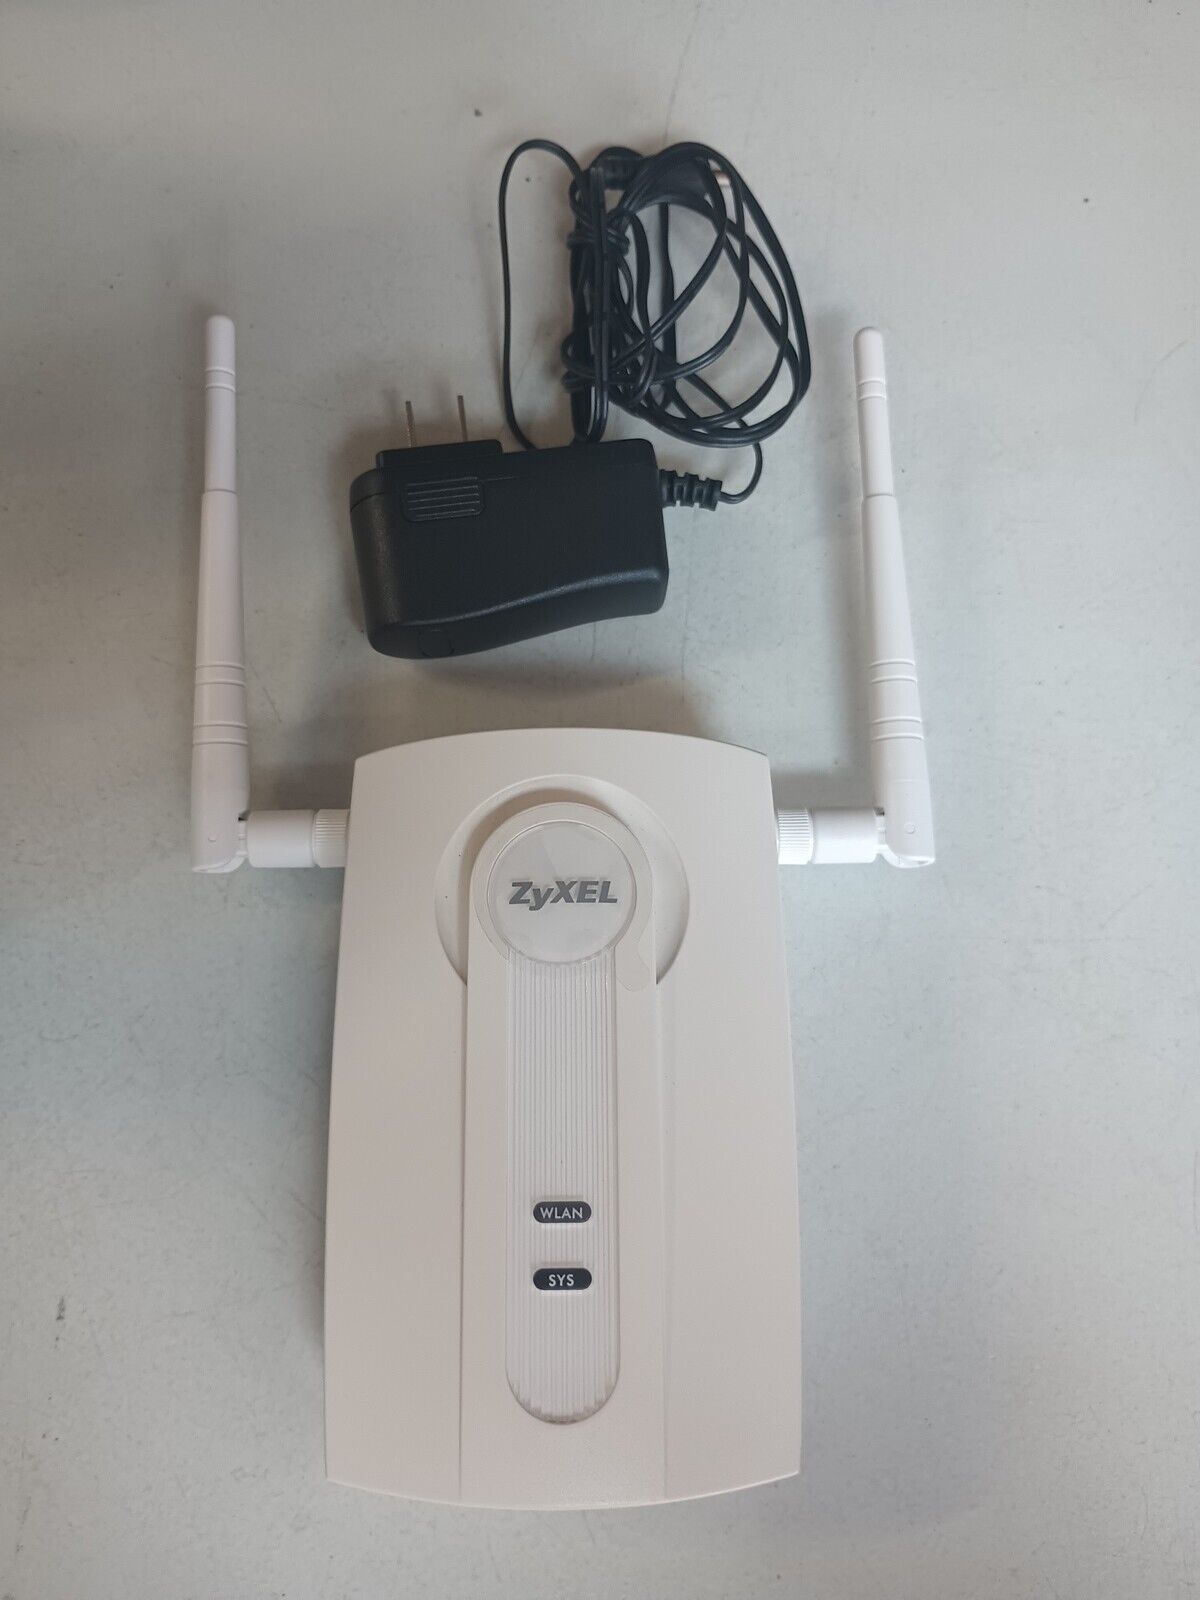 ZyXEL NWA1100-N - Wireless Access Point -with Power Cord